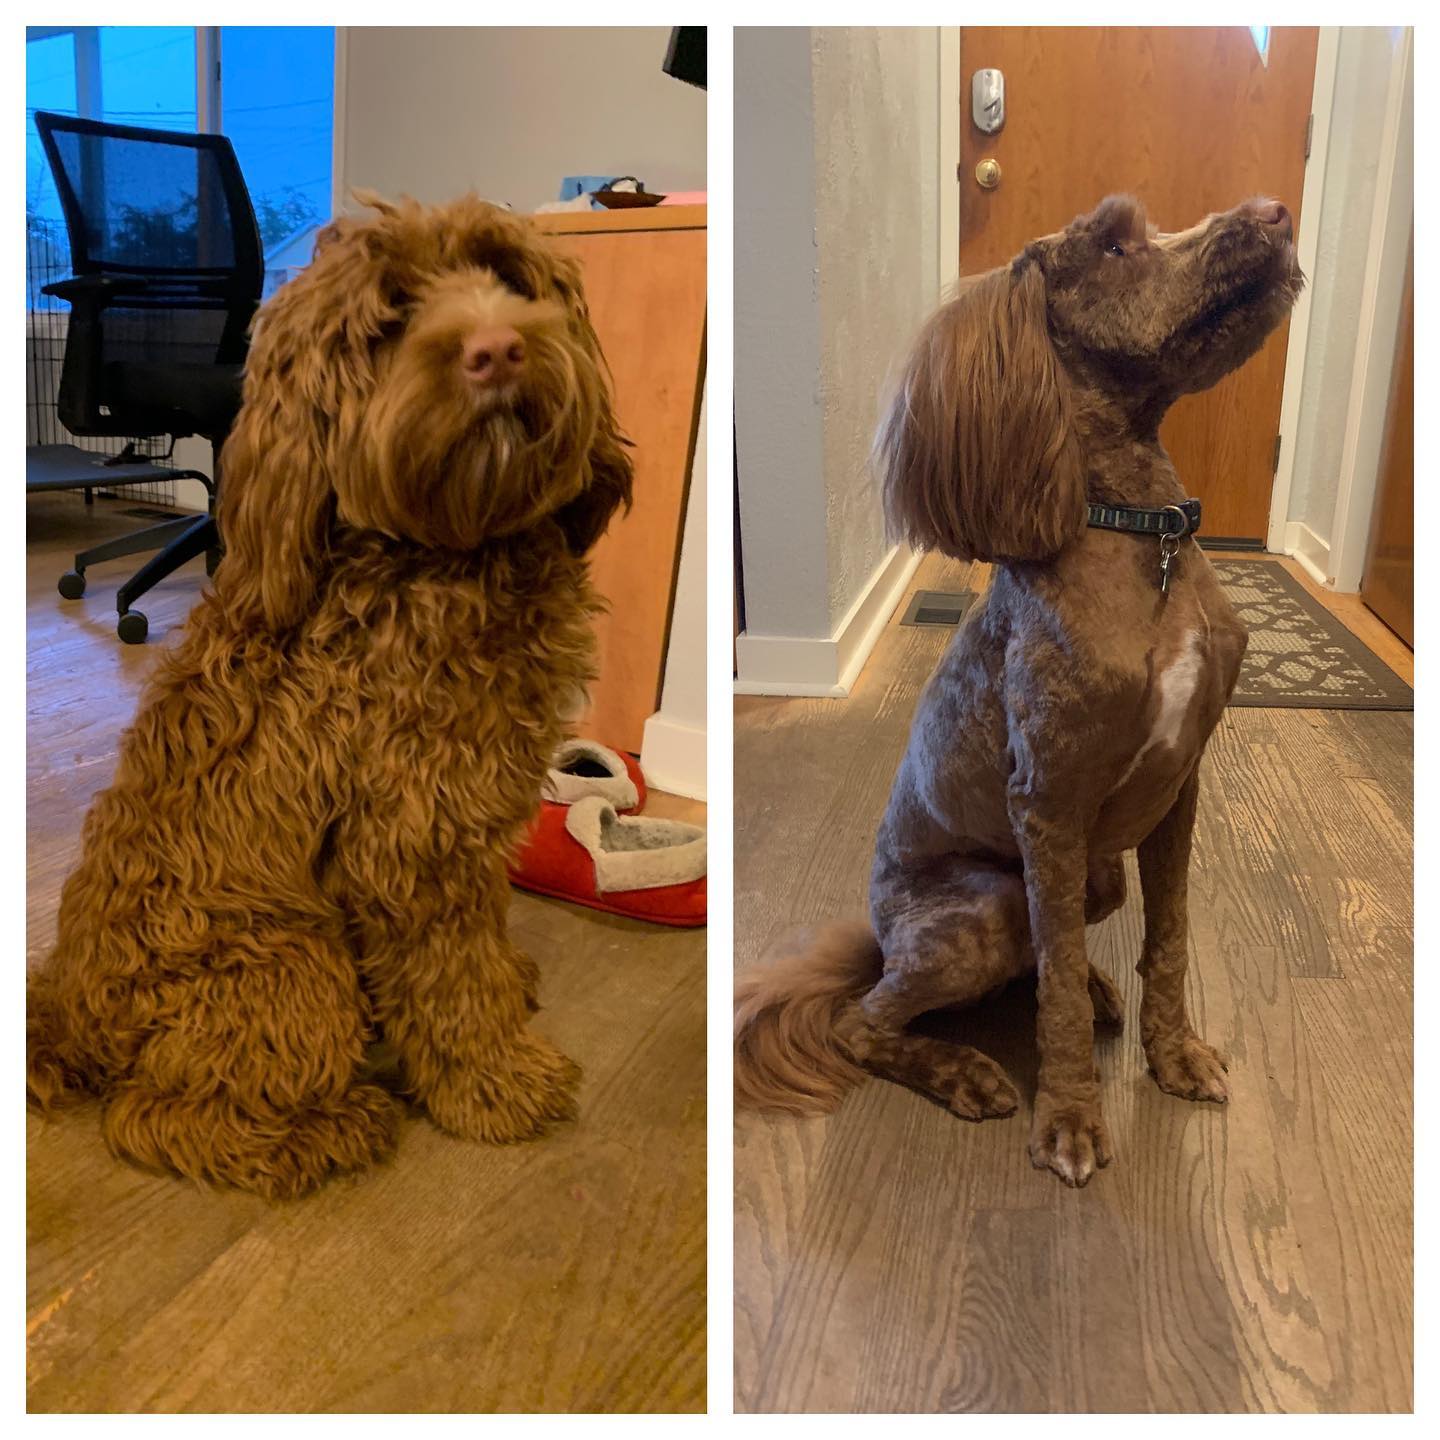 It’s taken a while to get over the shock, but last week Rusty got a haircut. He looks and acts like such a different dog after getting cleaned up. Slowly I’m getting used to it. #labradoodle #australianlabradoodle #sunvalleylabradoodles #puppy #yyj #dogsofinstagram #dogsofig #rustydoodle